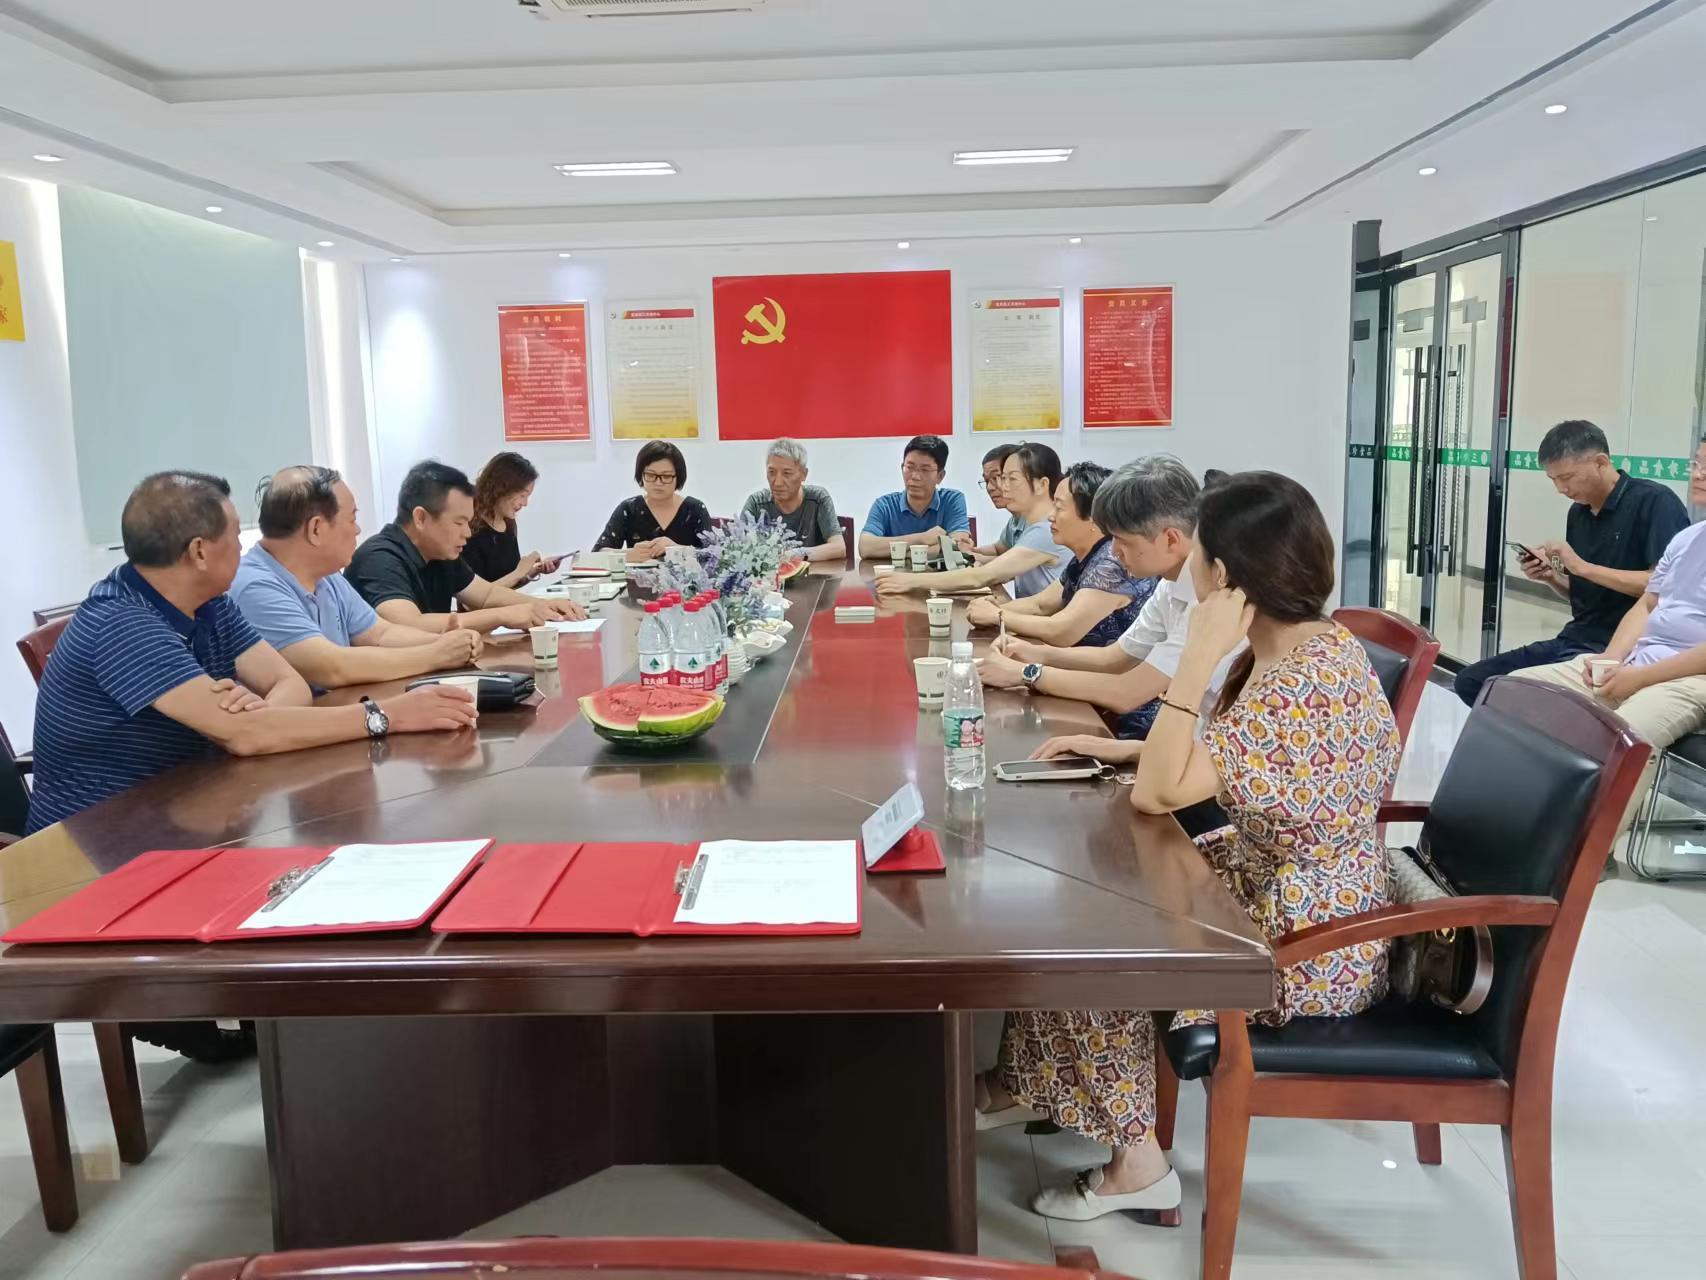 July 2022 (signed with Hubei Institute of Material Circulation Technology for Industry-University-Research Cooperation)